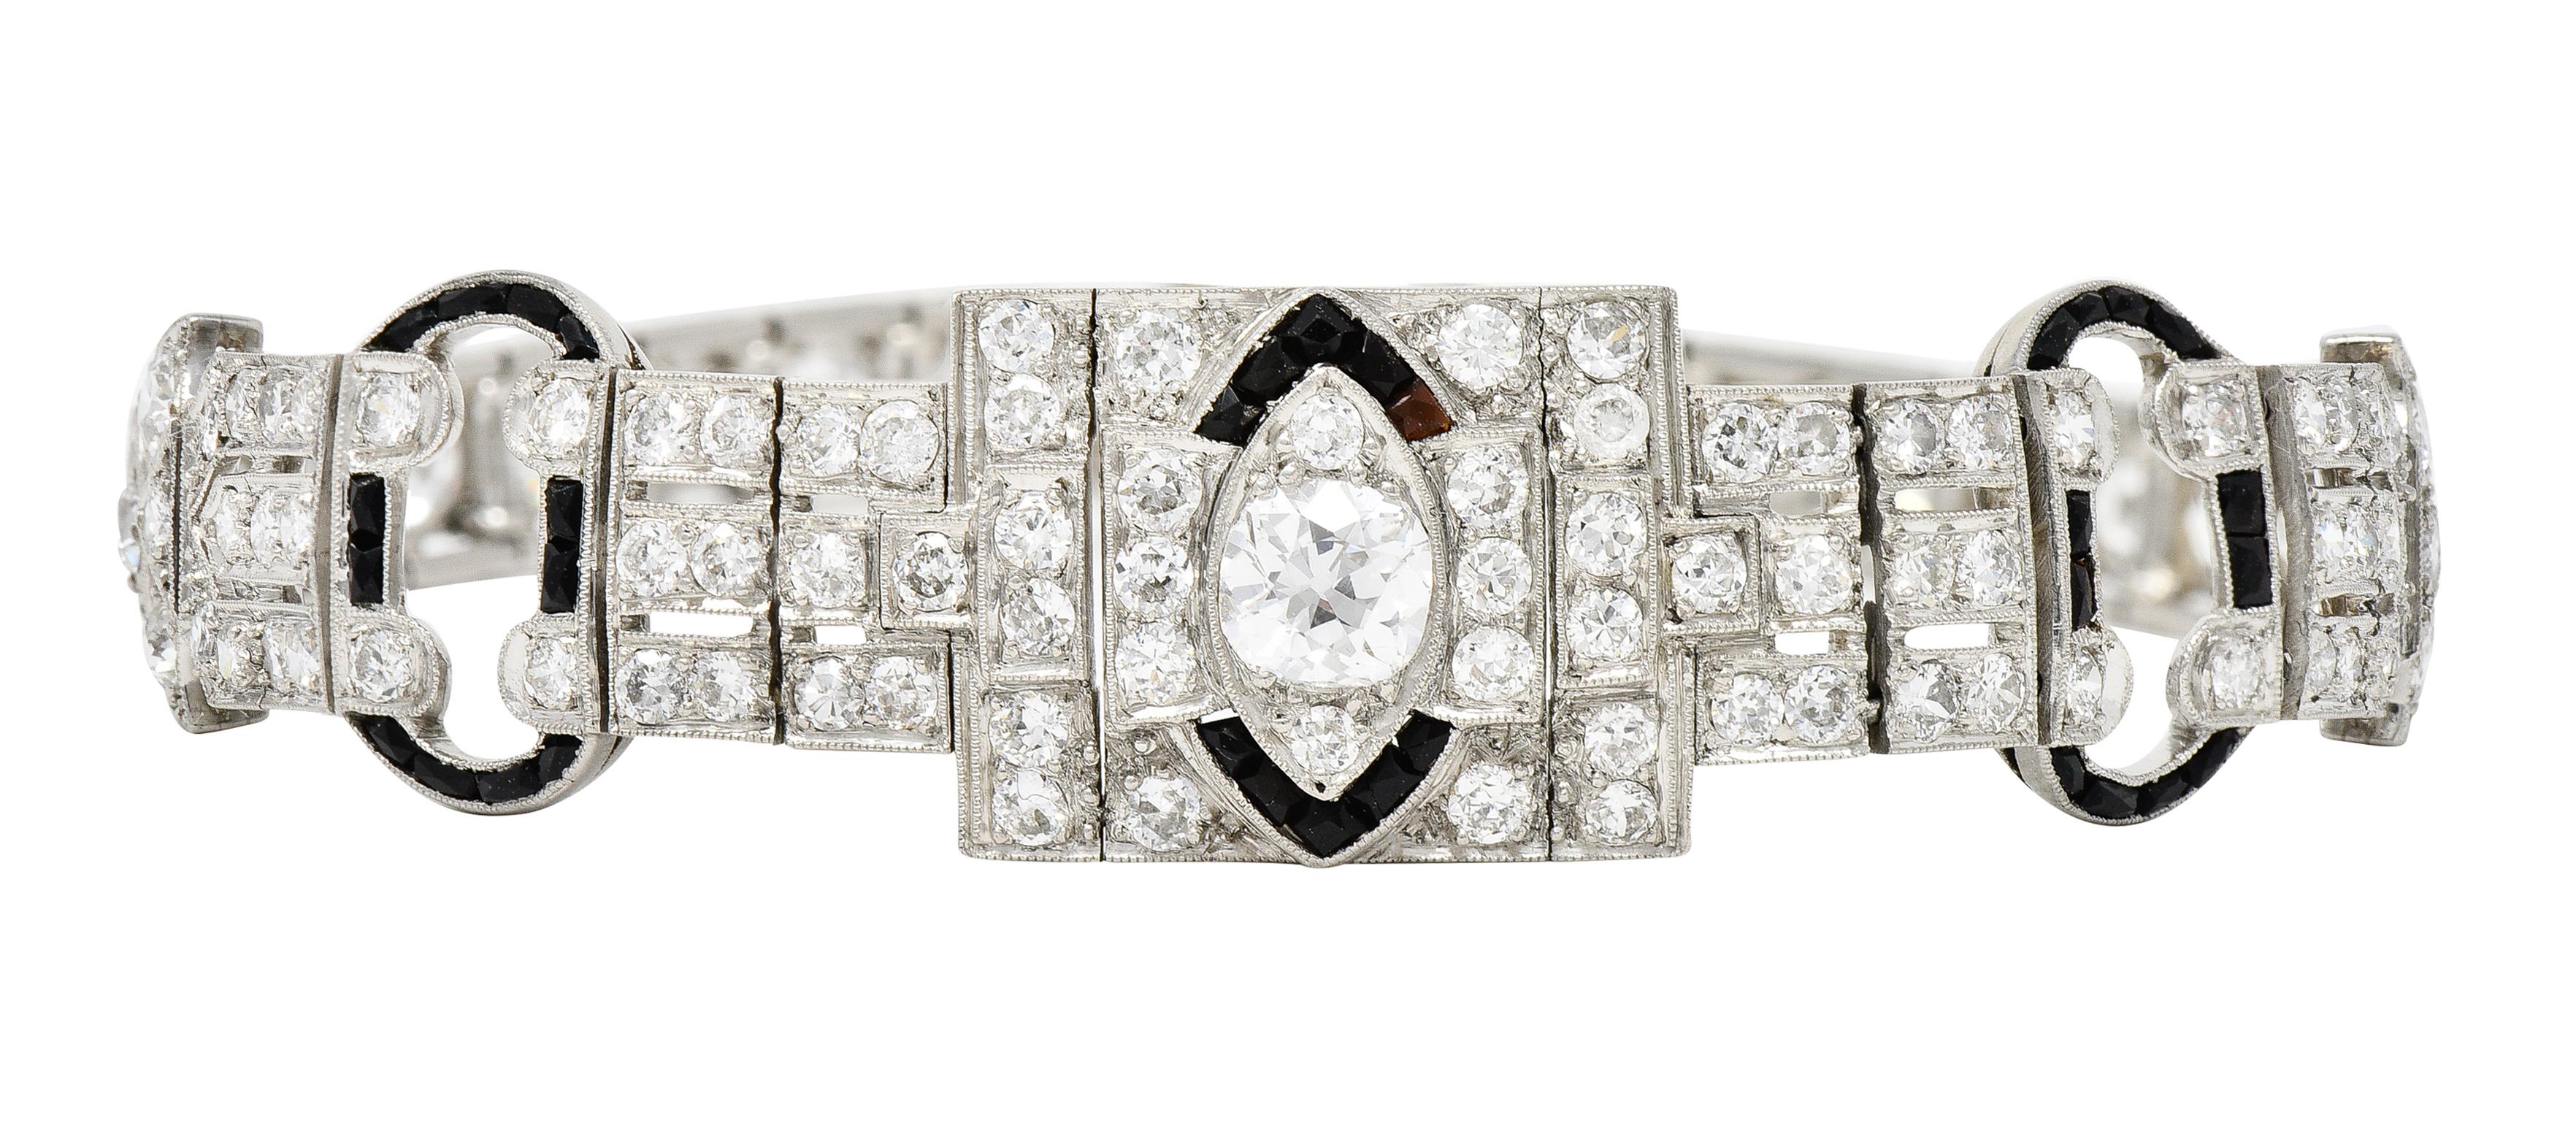 Comprised of hinged box links with pierced geometric stations centering an old mine cut diamond
Weighing approximately 0.76 carat - G color with VS2 clarity - bead set in marquise shaped surround
Featuring a halo surround and buckle motif stations